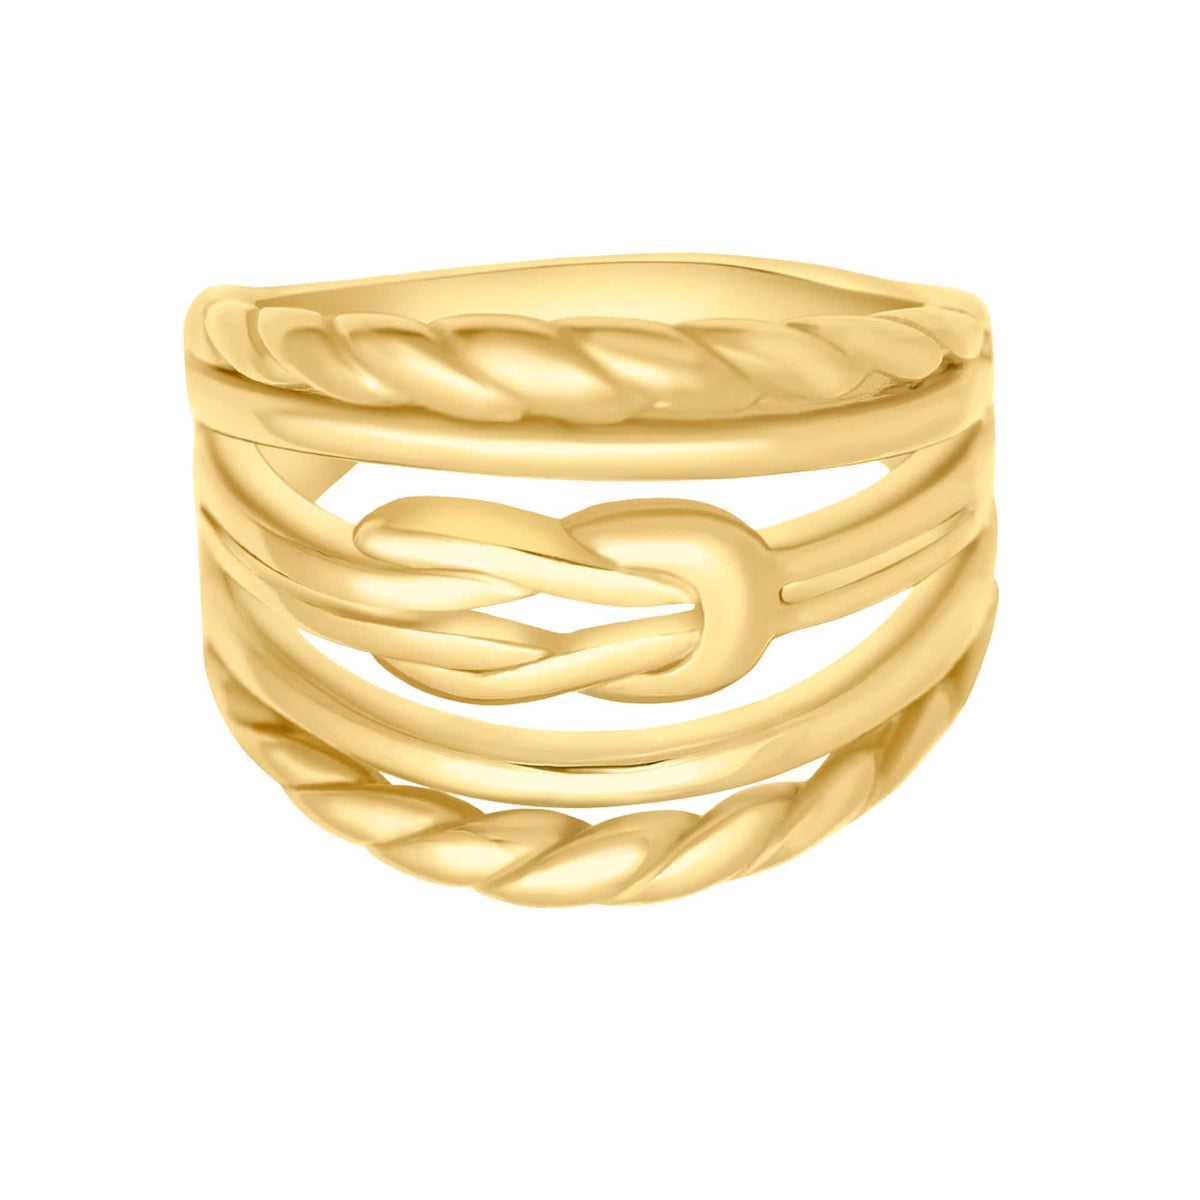 BohoMoon Stainless Steel Martha Ring Gold / US 6 / UK L / EUR 51 (small)